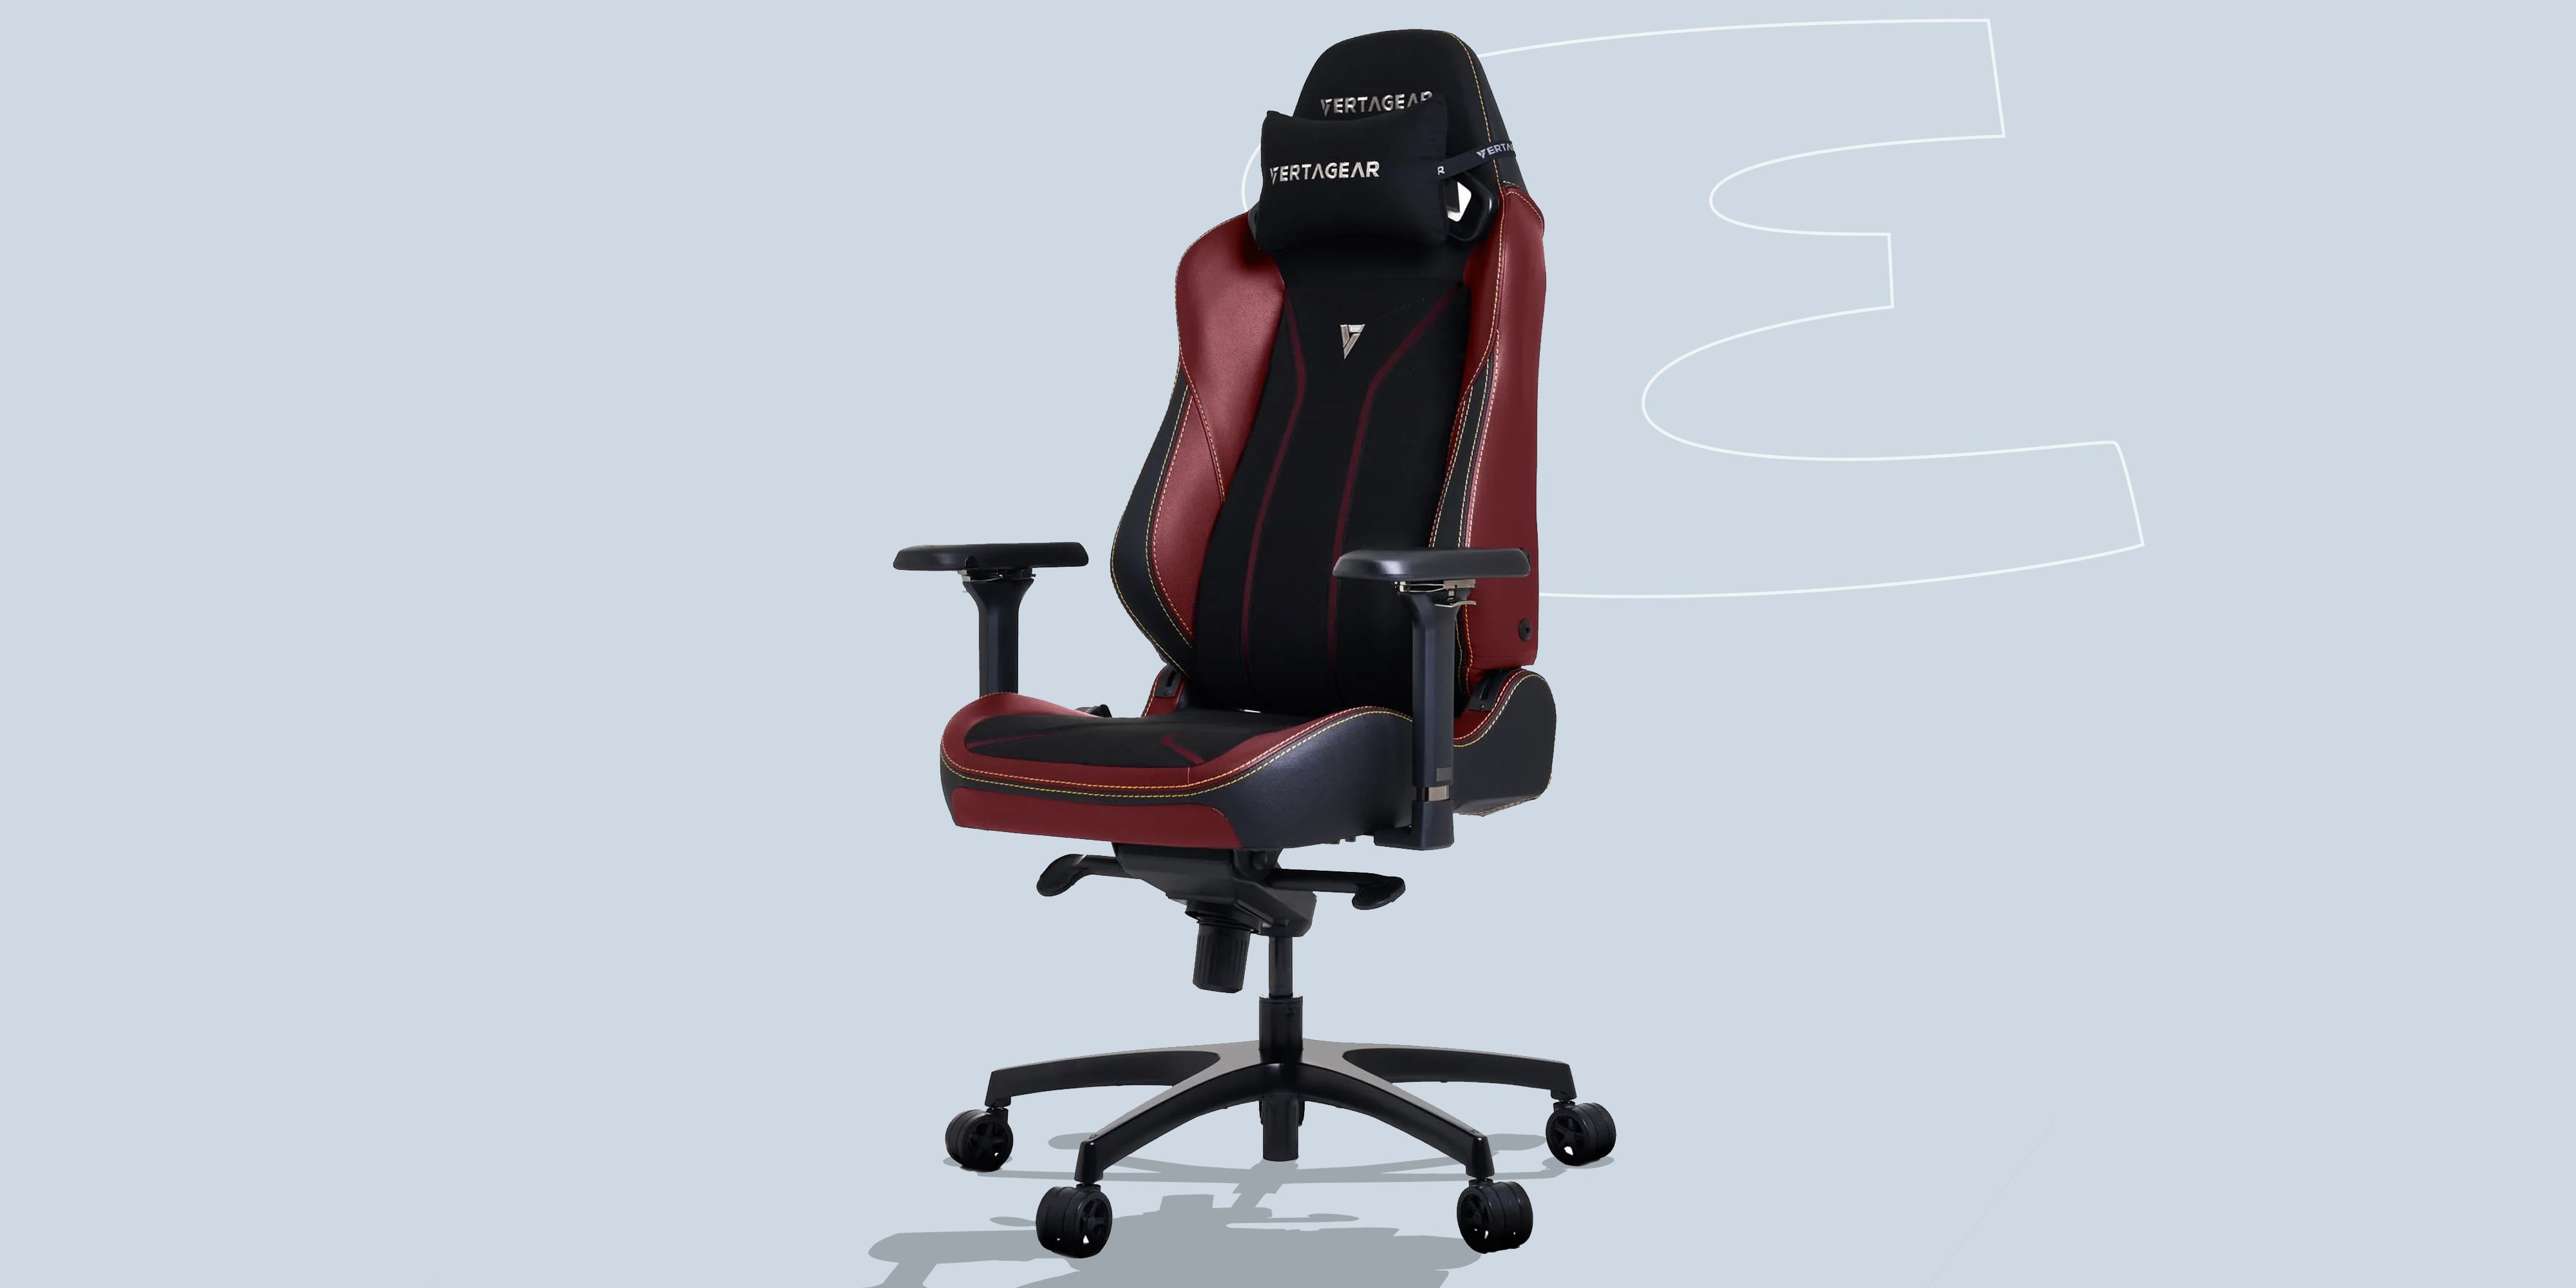 https://hips.hearstapps.com/hmg-prod/images/index-gaming-chairs-64e7a47809625.jpg